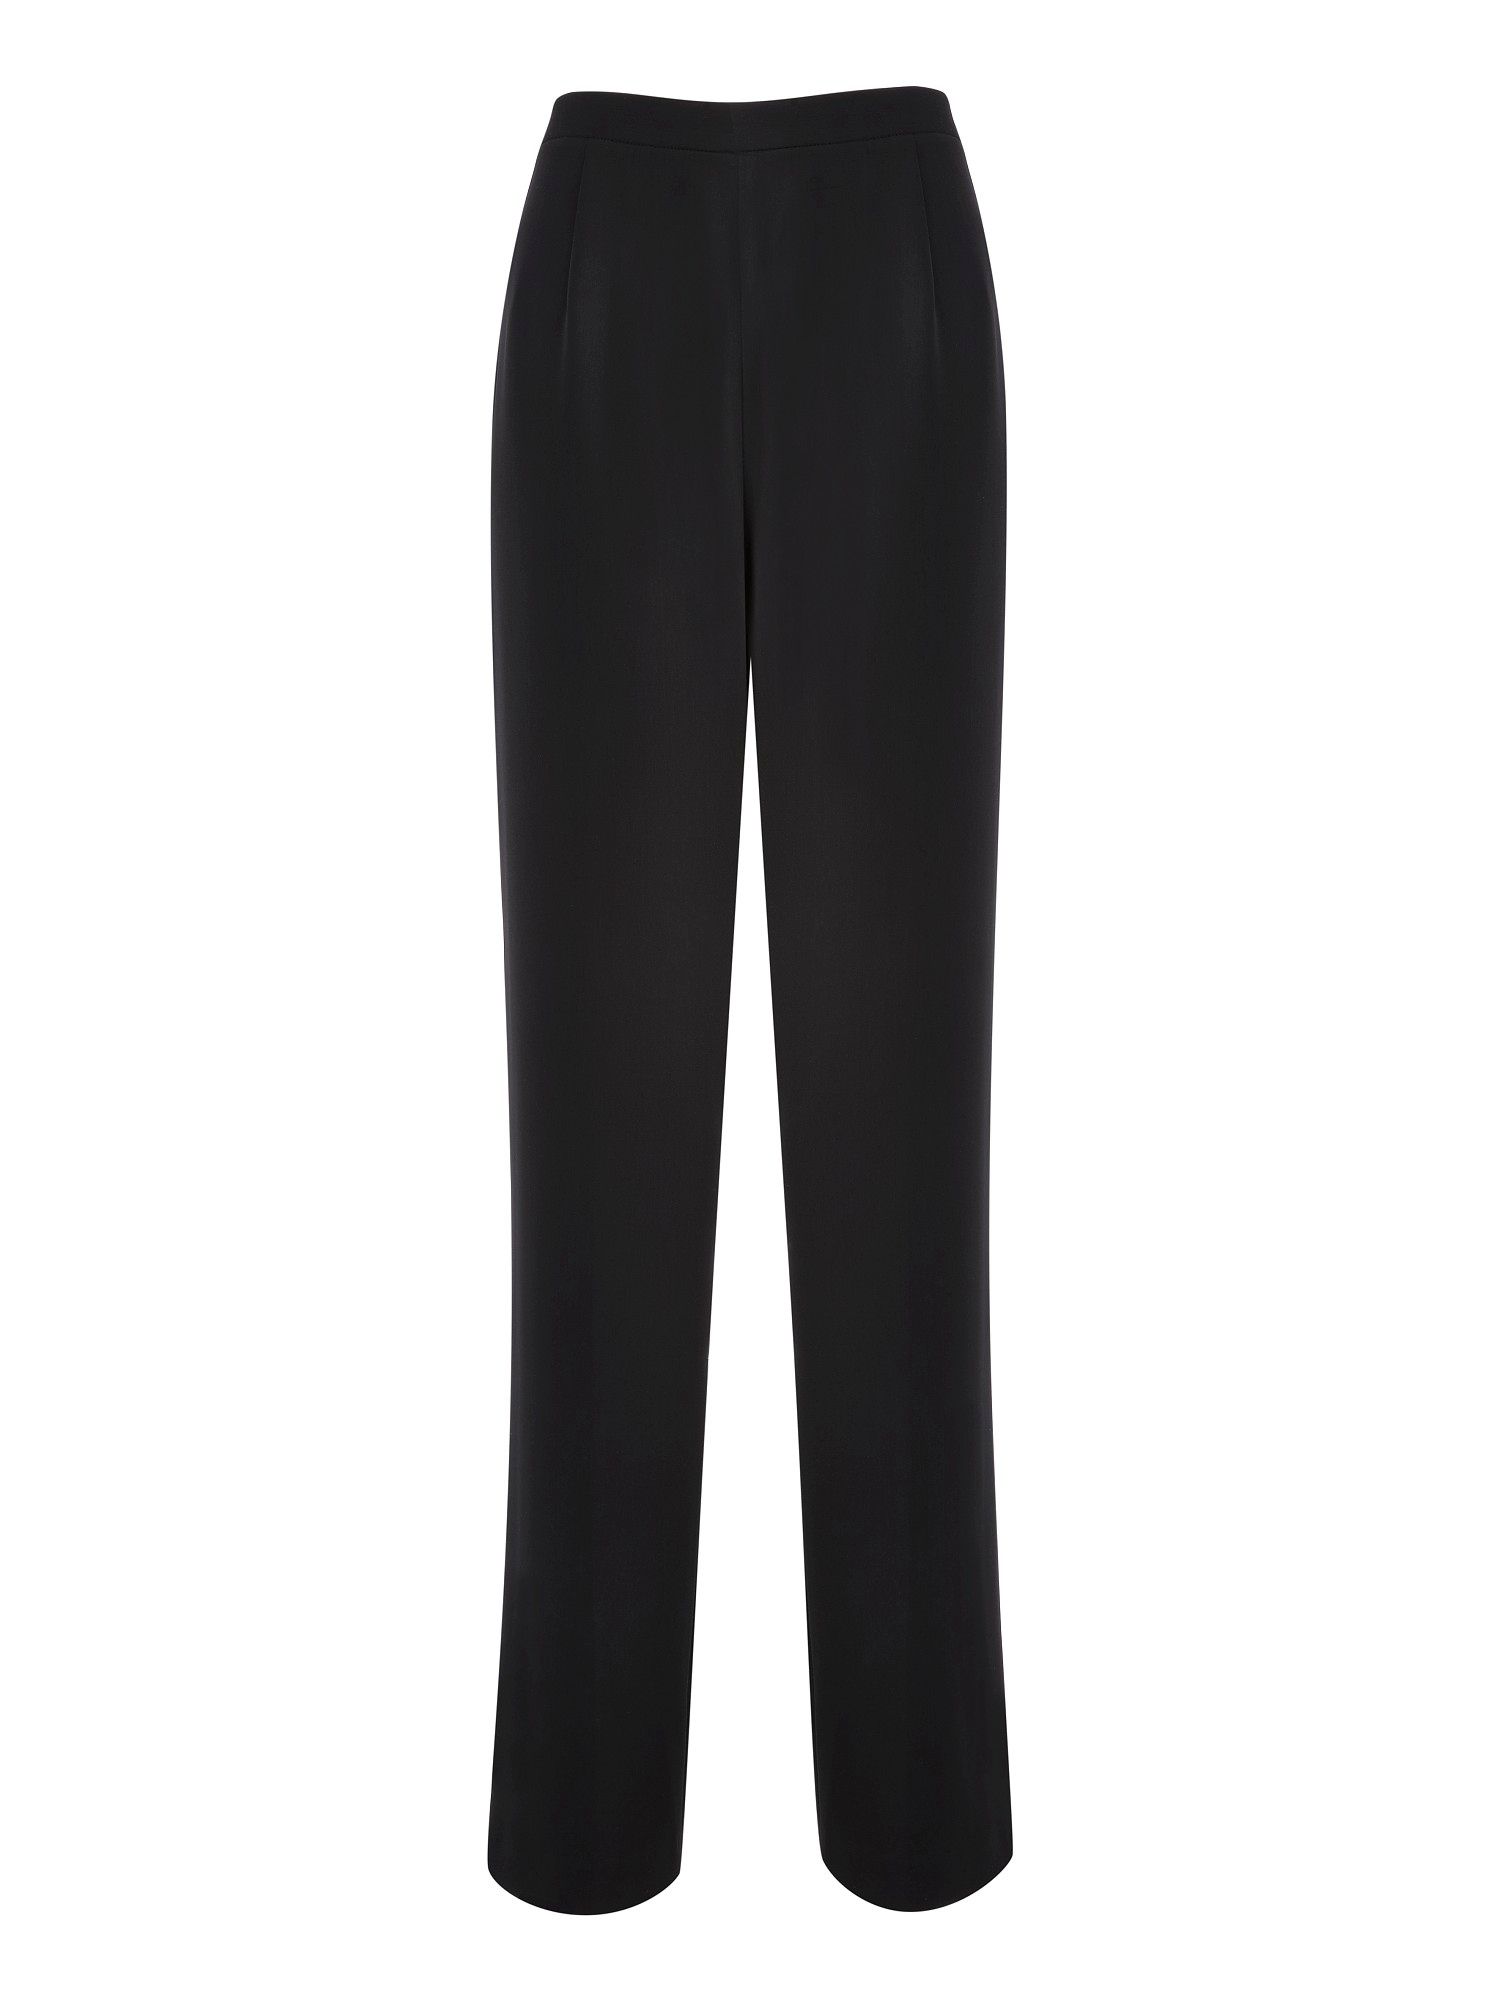 Jacques Vert Jaques Vert Chiffon Trousers in Black | Lyst